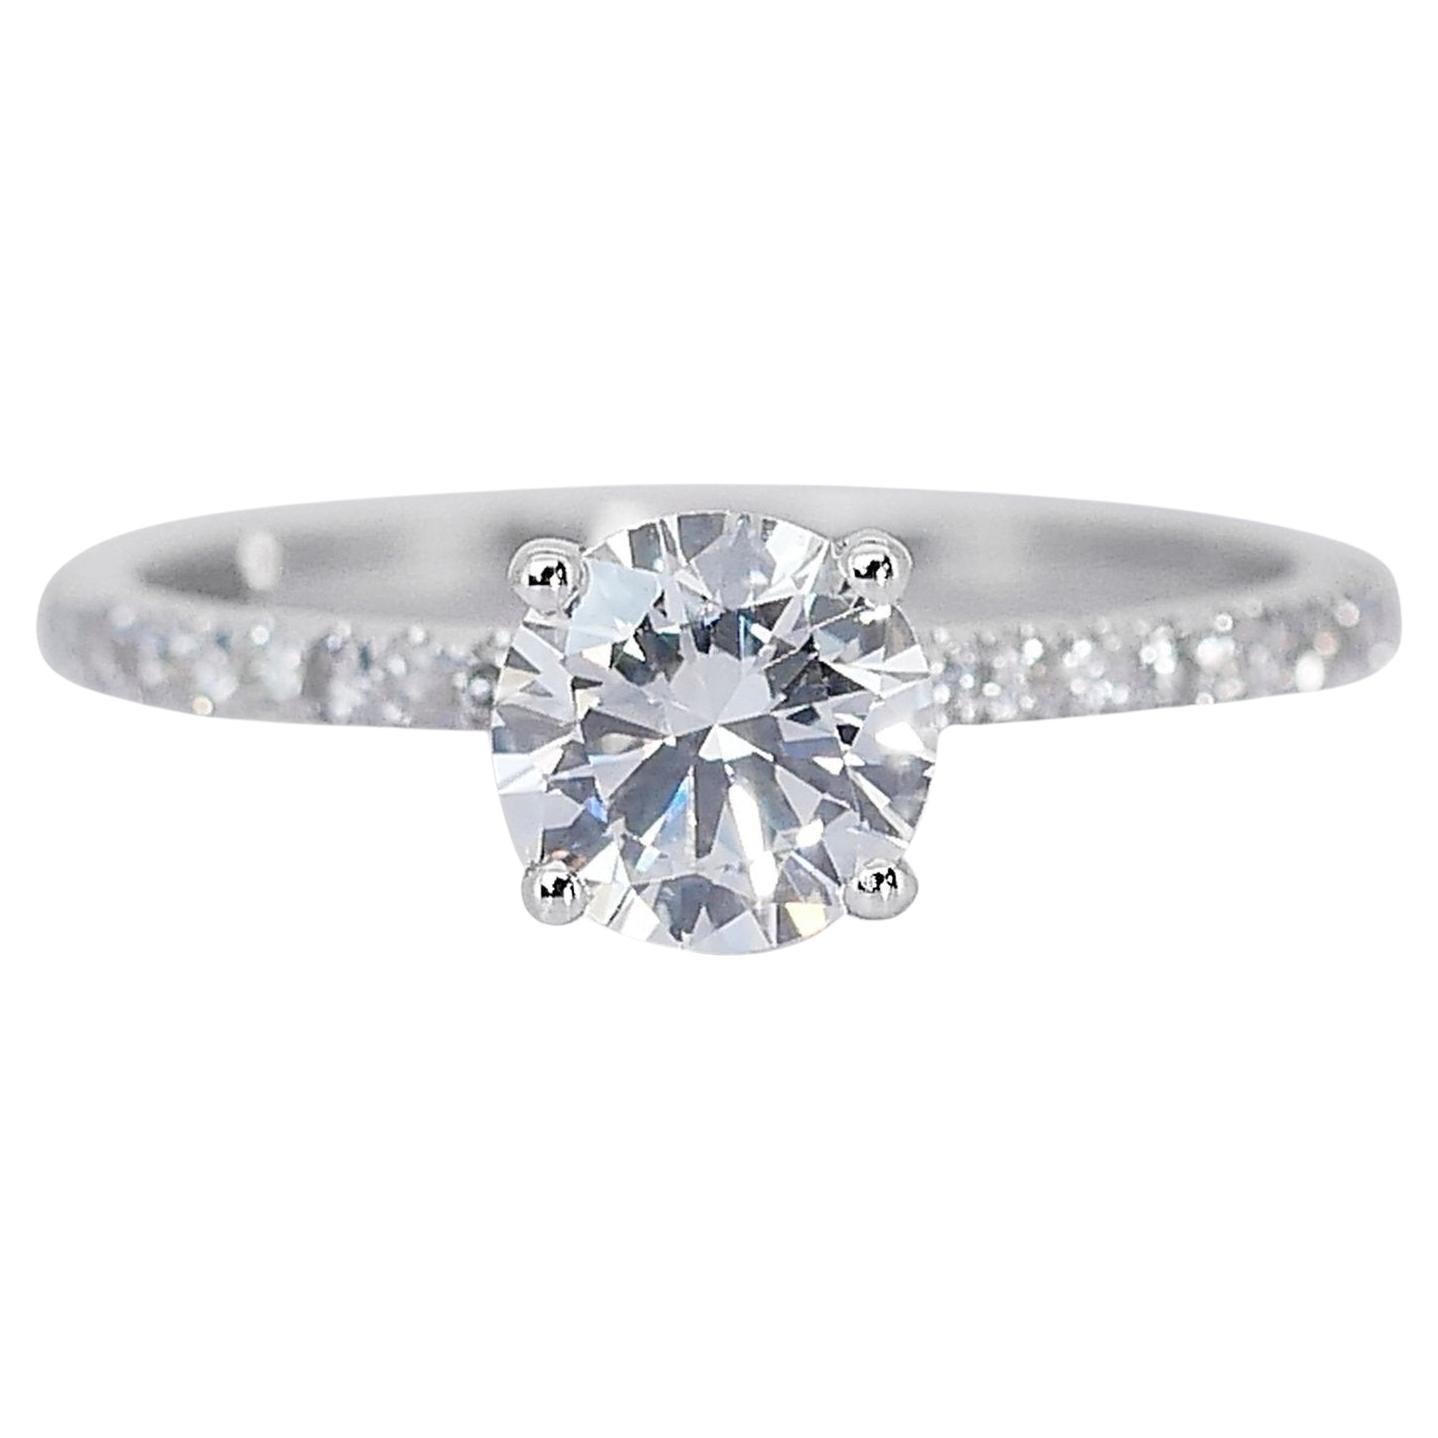 Luminous 1.16ct Diamond Pave Ring in  18k White Gold - GIA Certified For Sale